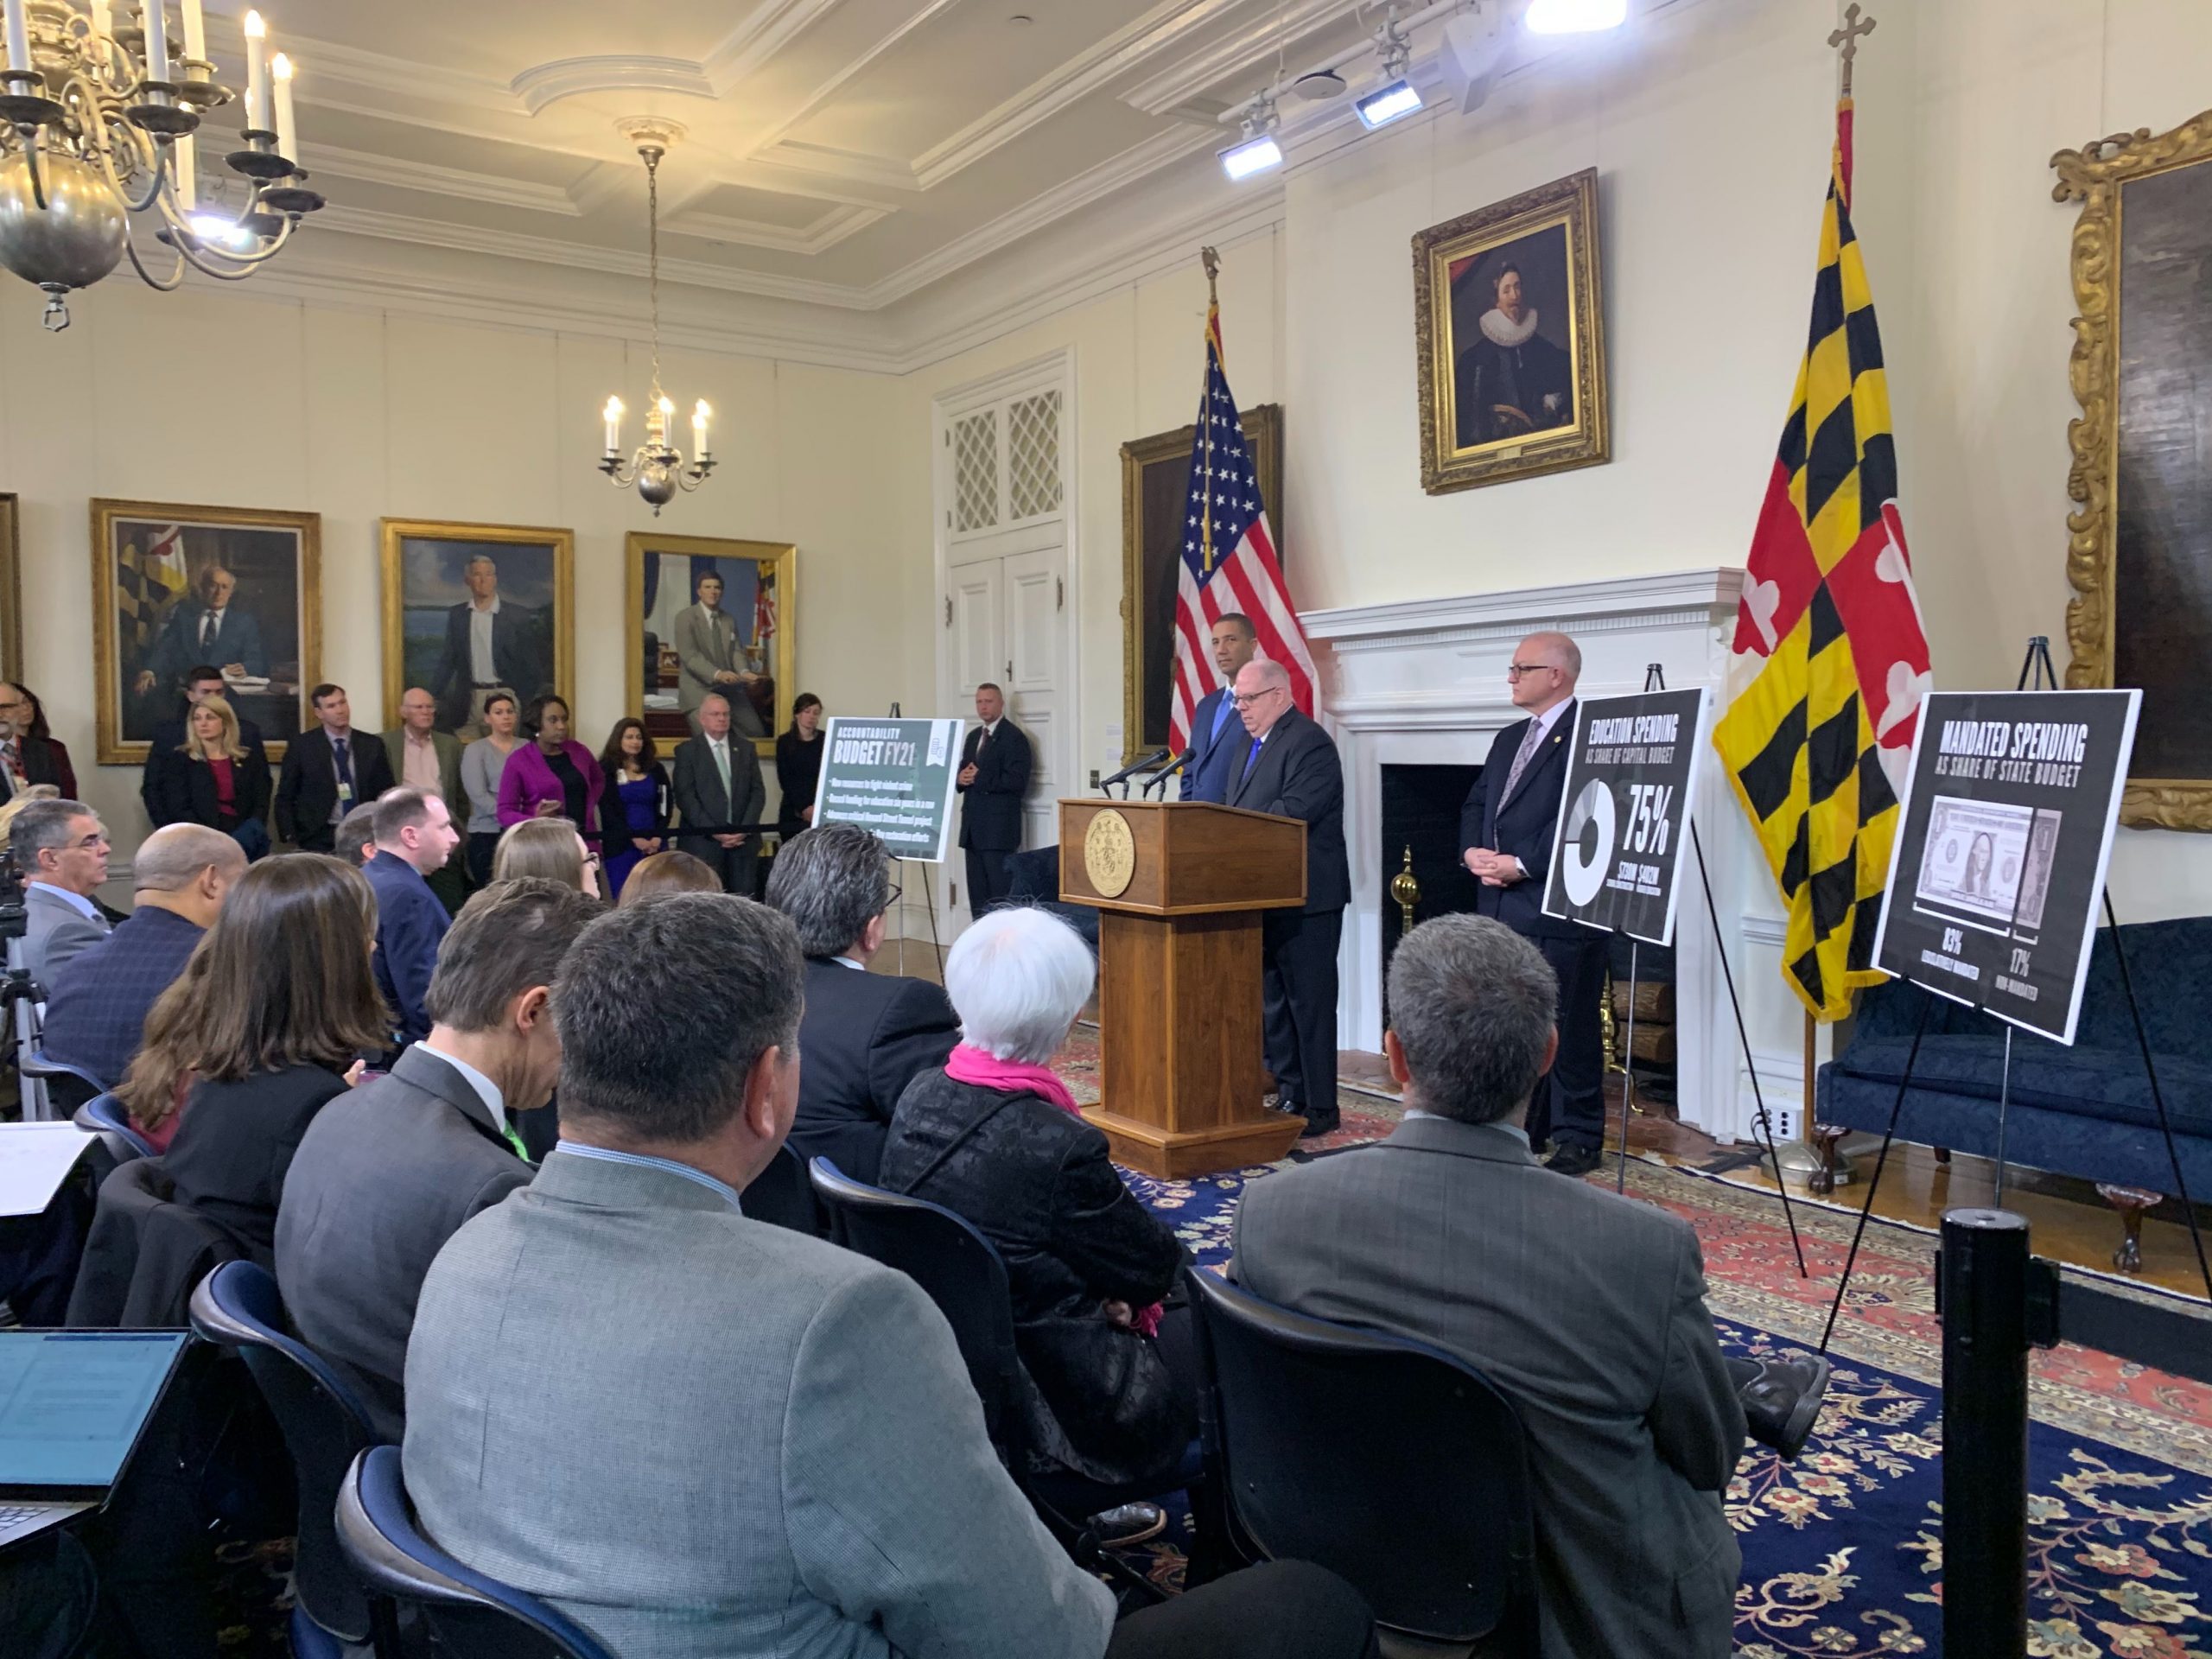 Gov. Larry Hogan, R, holds a press conference at the State House on Tuesday, January 14, 2020, to reveal highlights of the 2021 fiscal budget. (Capital News Service Photo by Alexis Duda.)